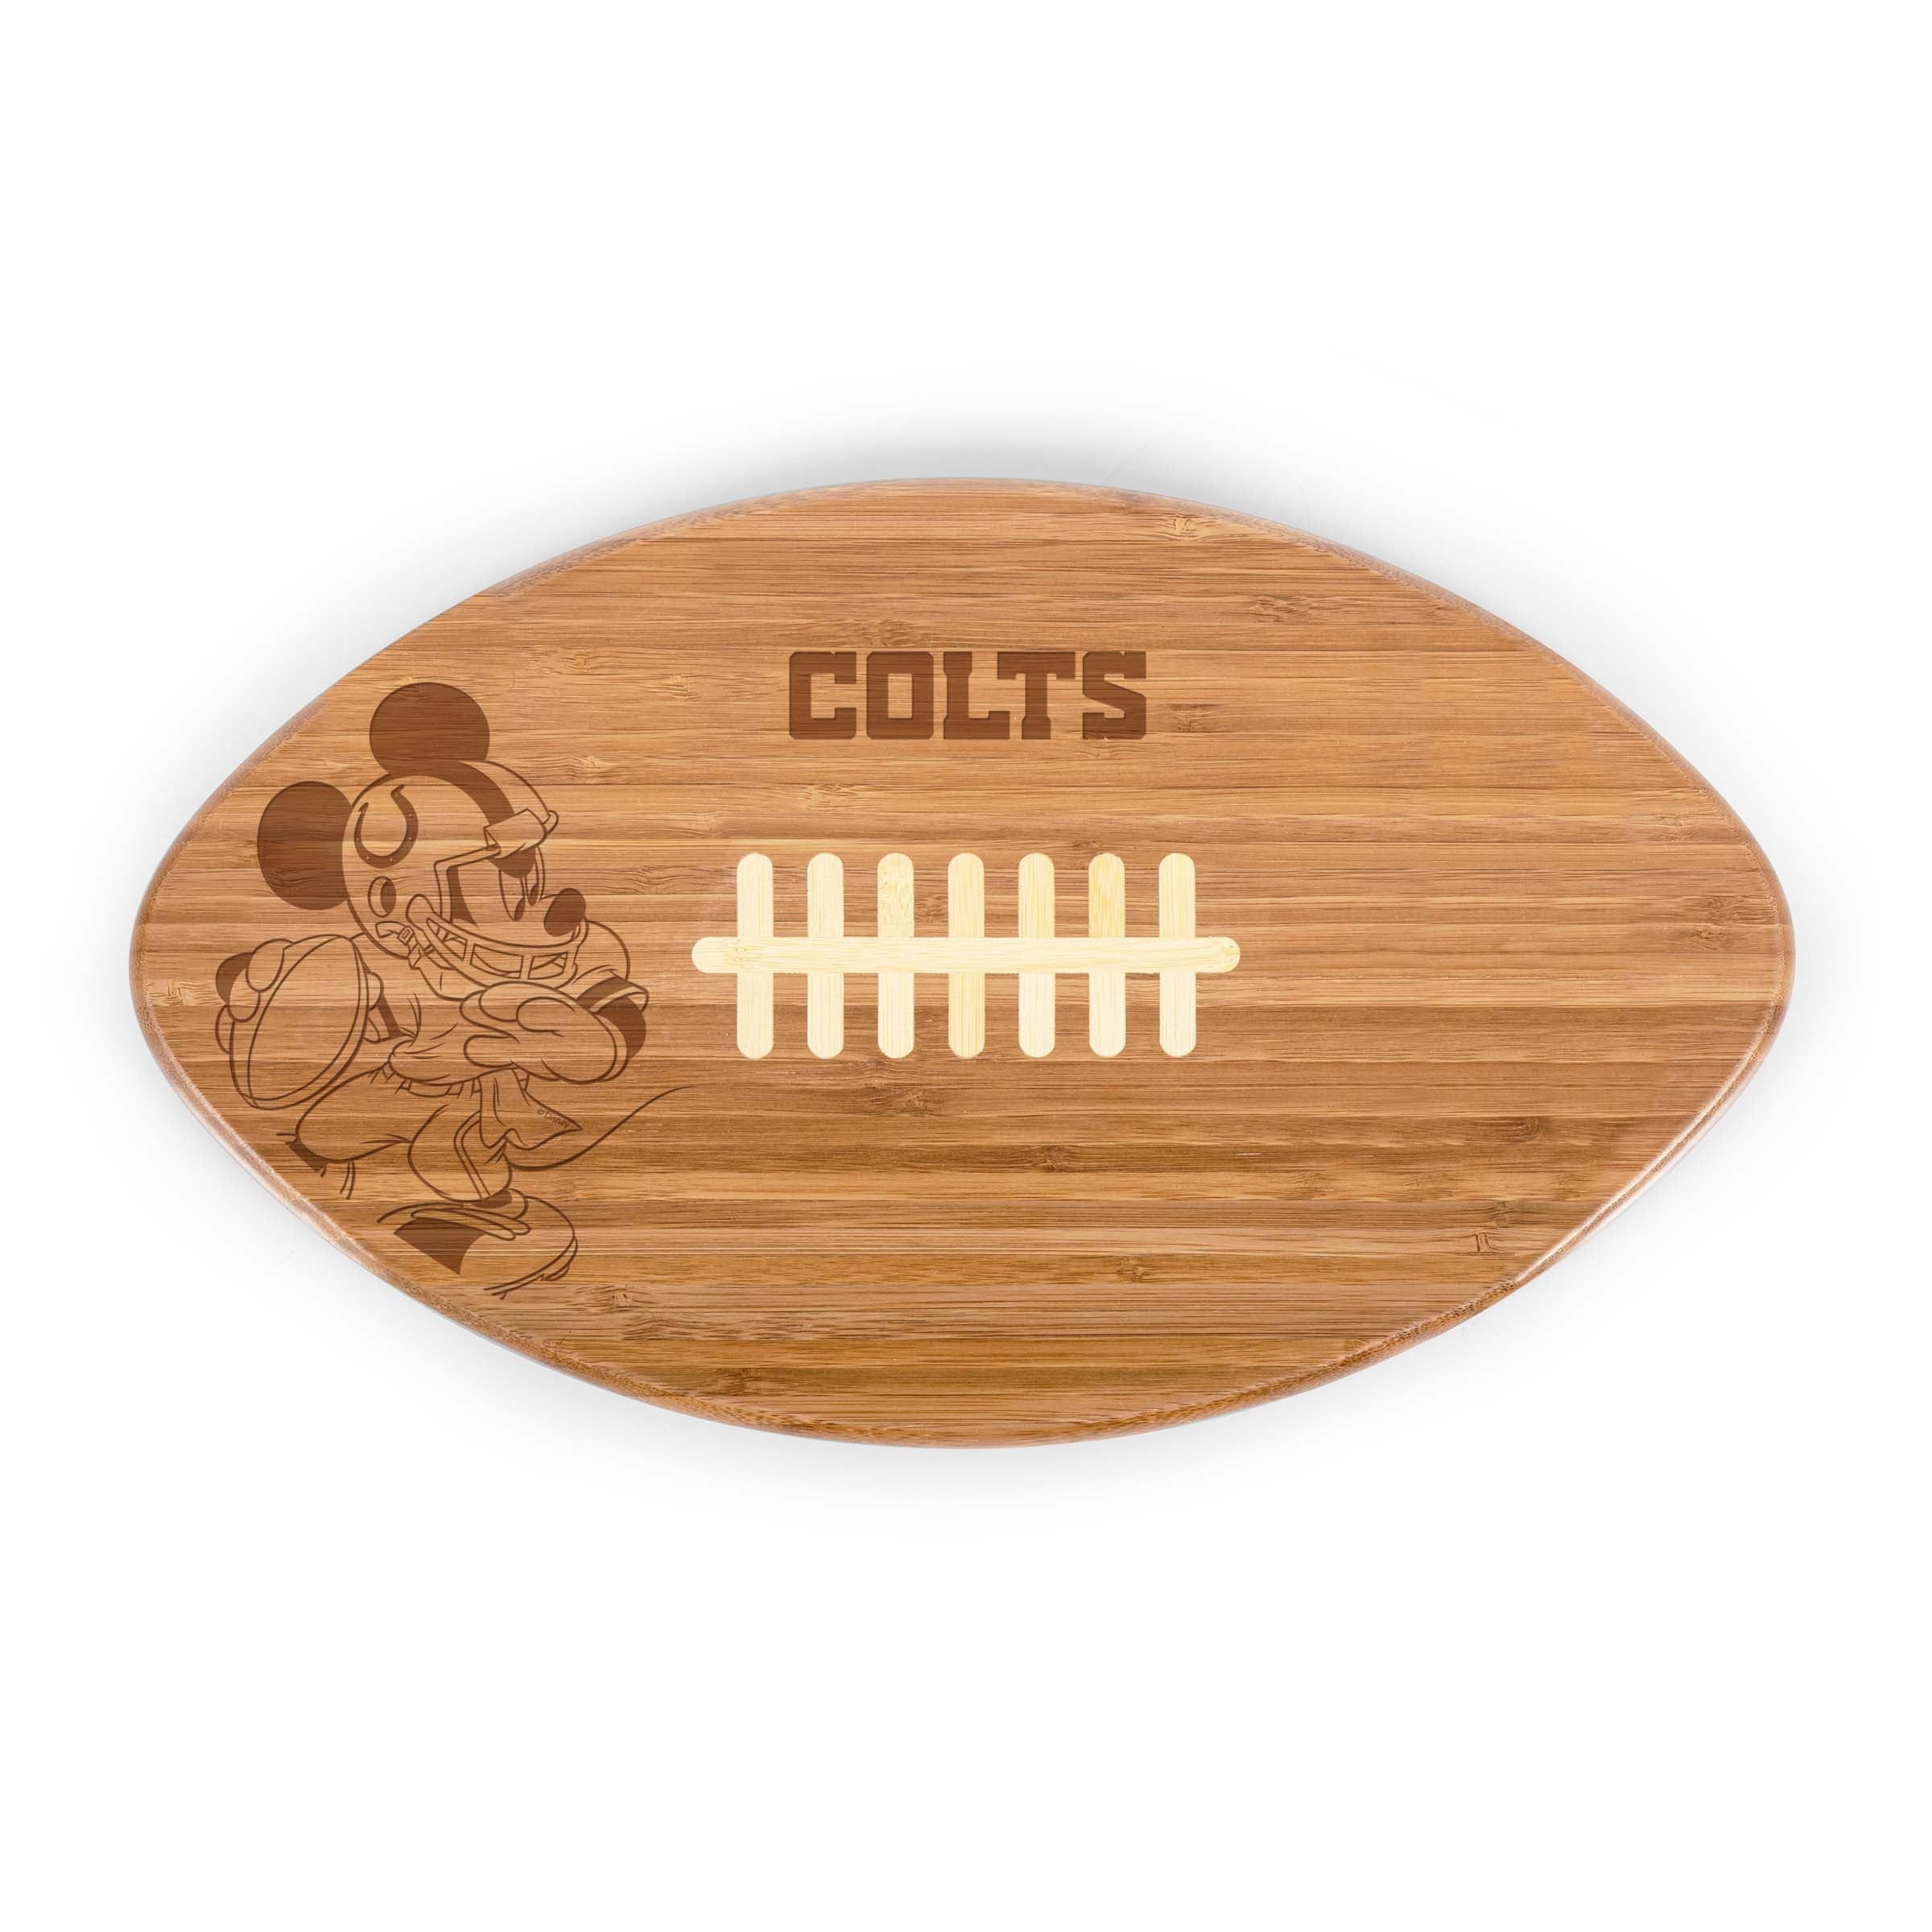 Indianapolis Colts Mickey Mouse - Touchdown! Football Cutting Board & Serving Tray